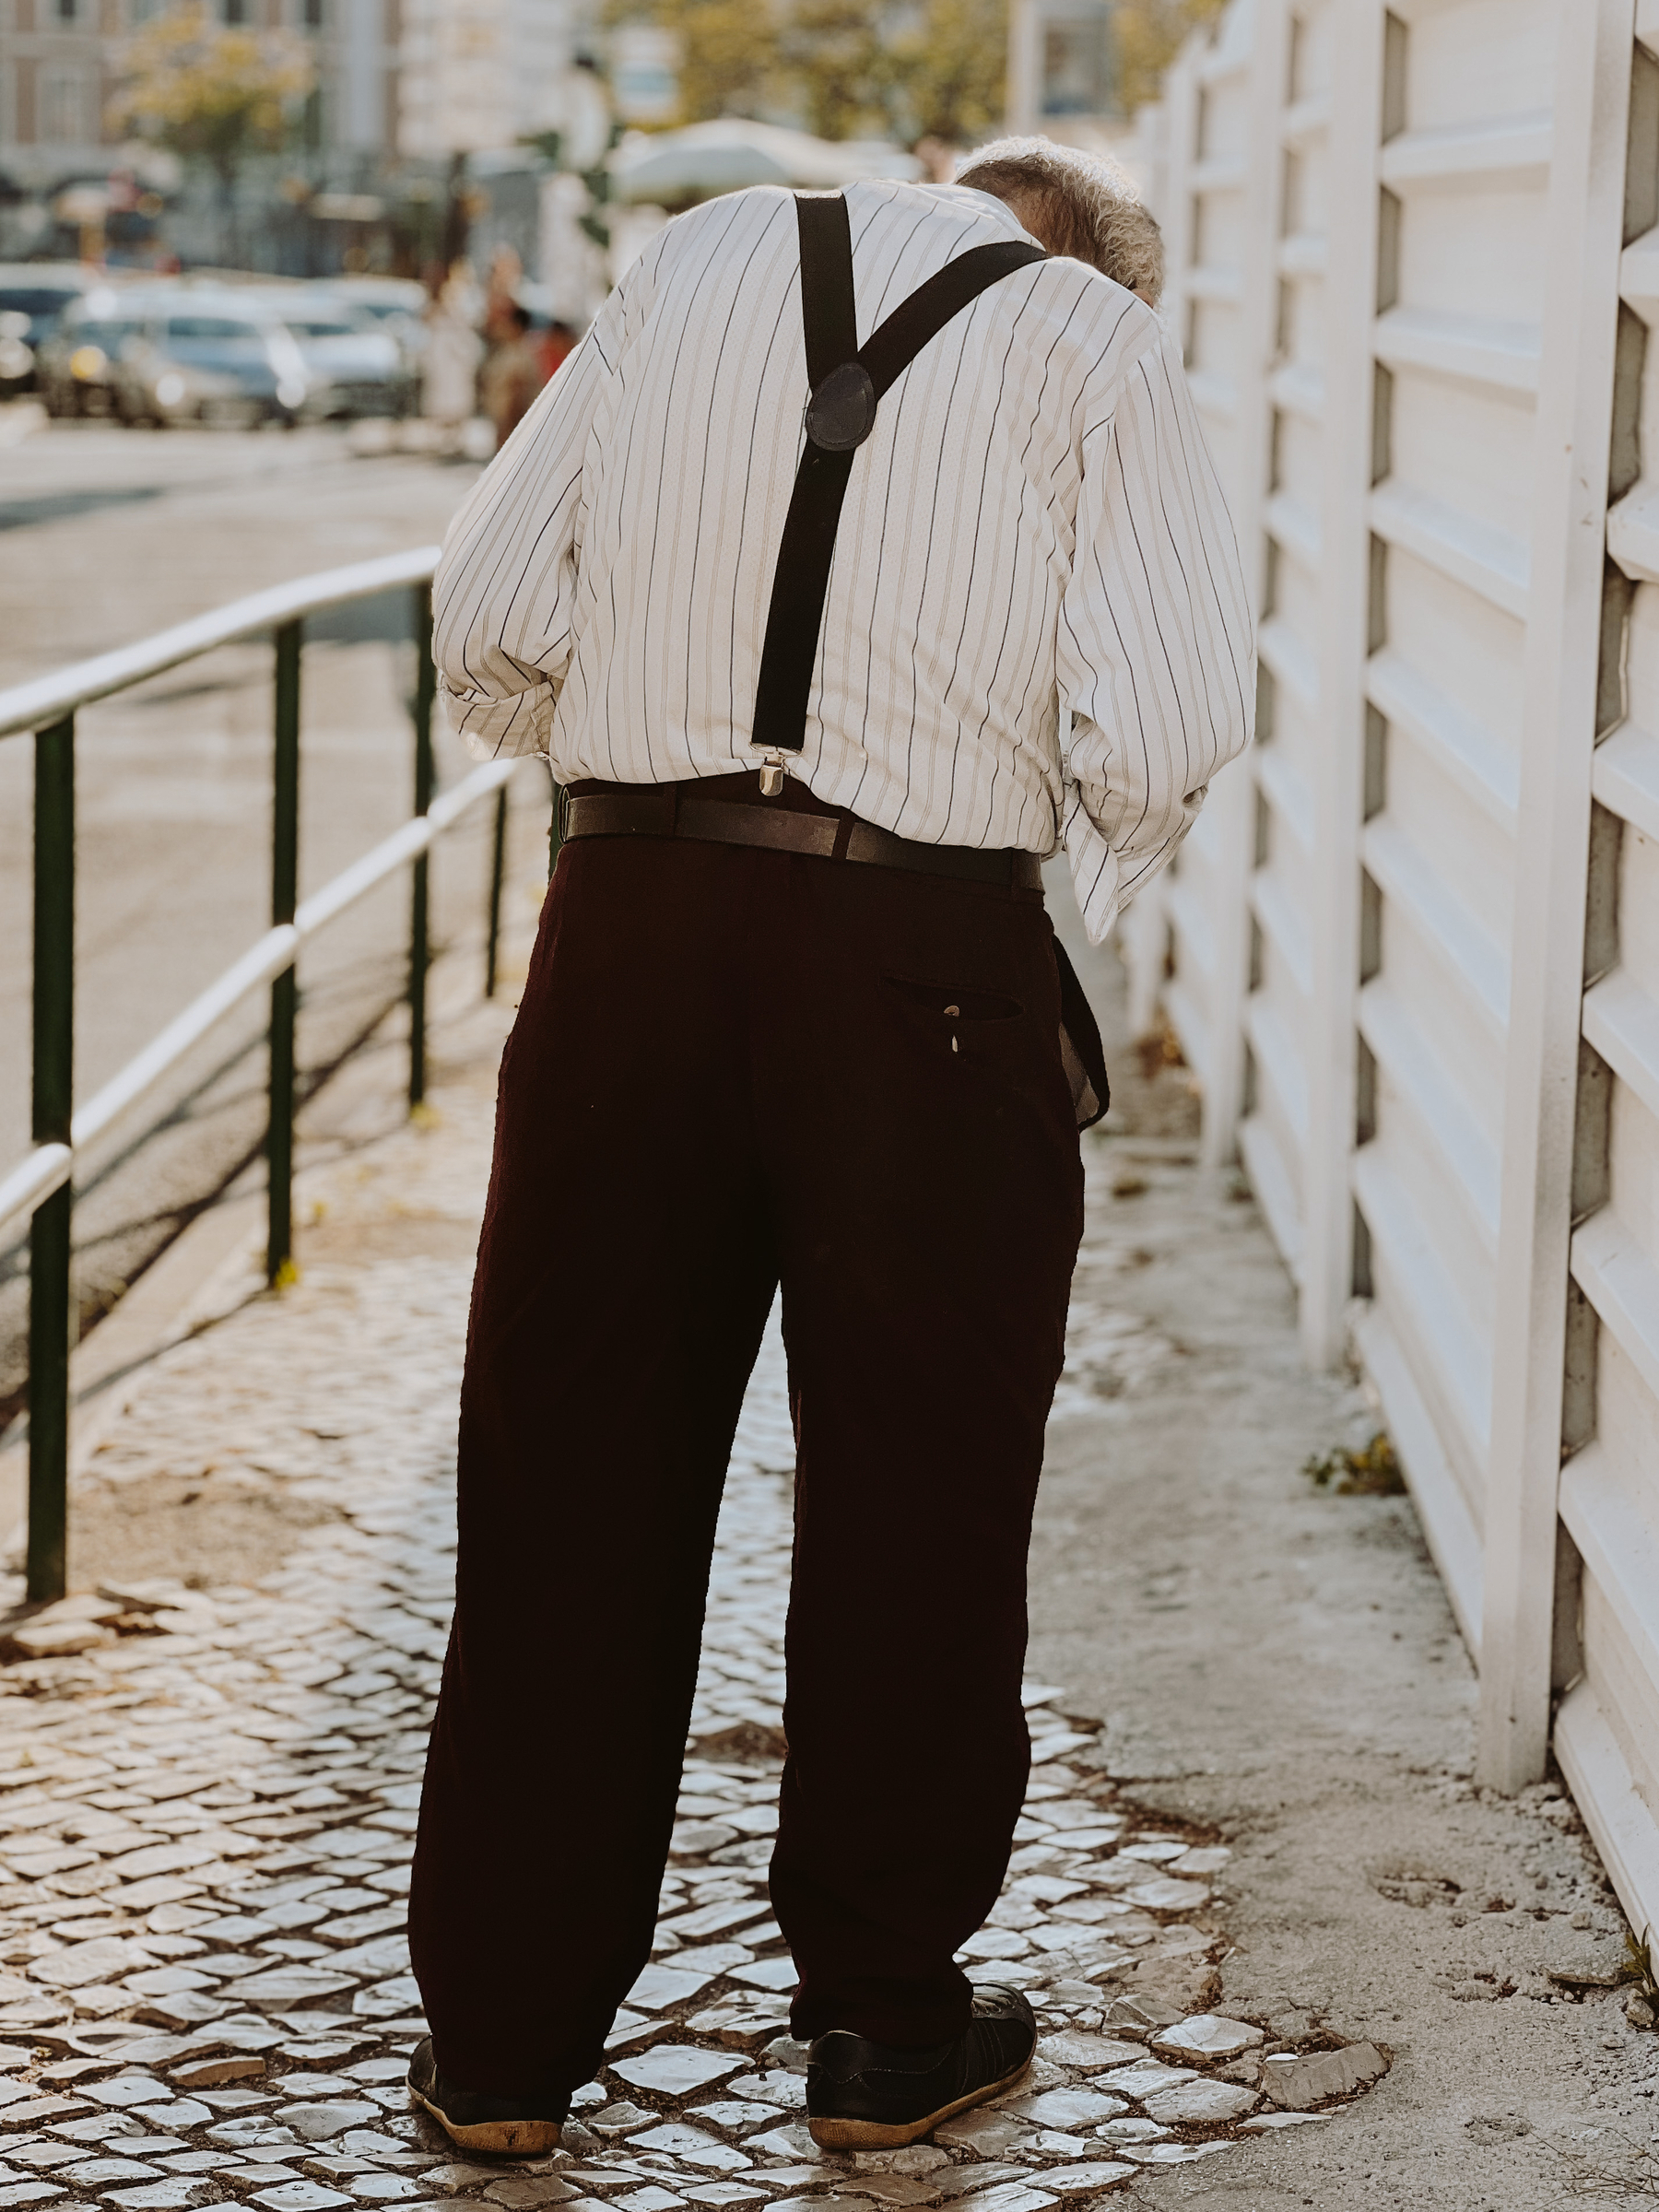 An hunched man, wearing suspenders. 